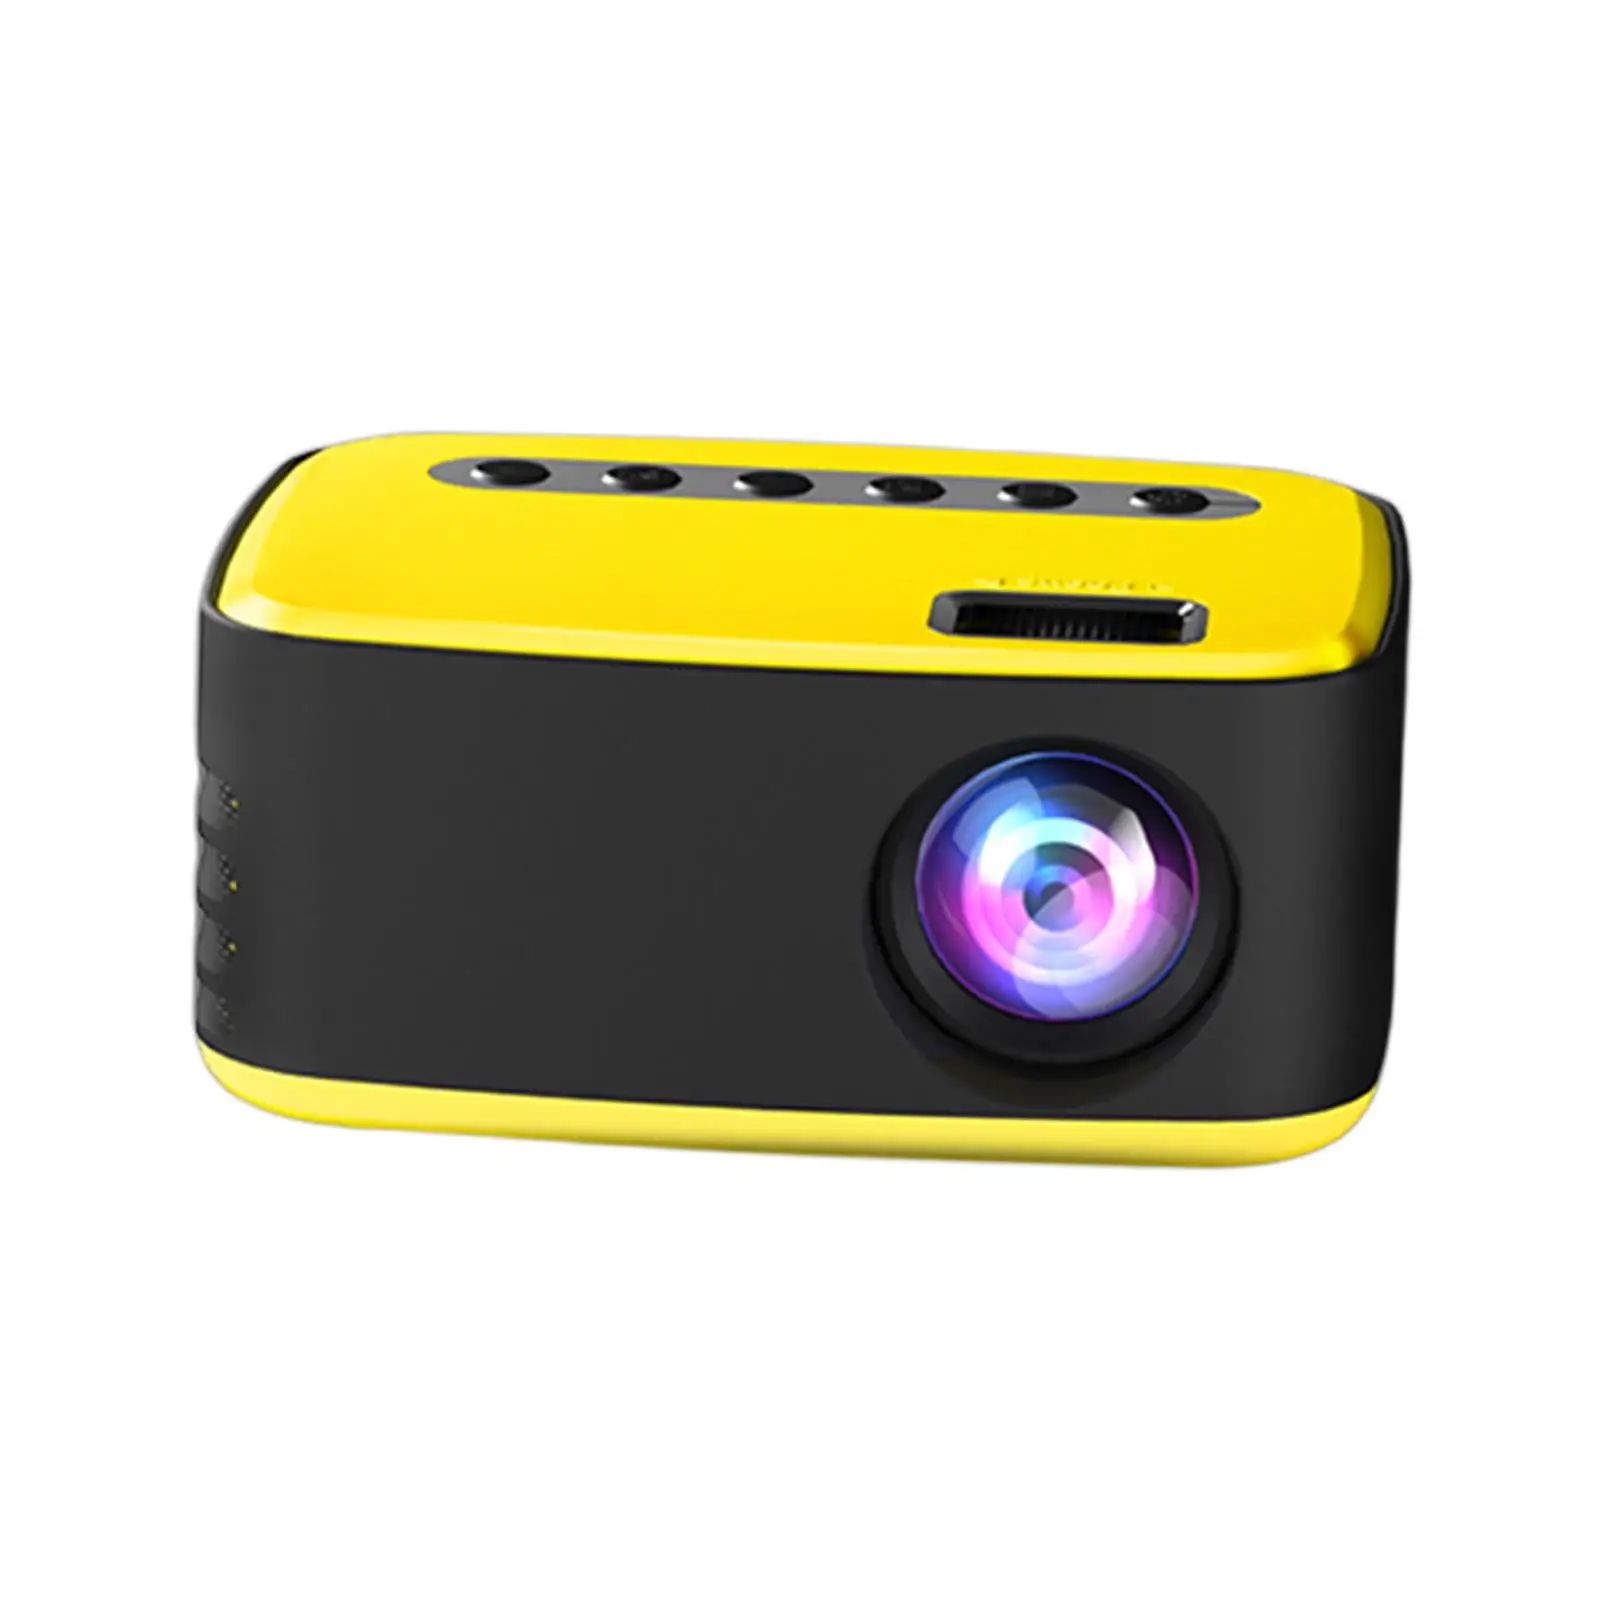 Projector Ultra Compact Portable Projector Pocket Projector for Office Theater Watch Anywhere Bedroom Inside Outside Kids Adults